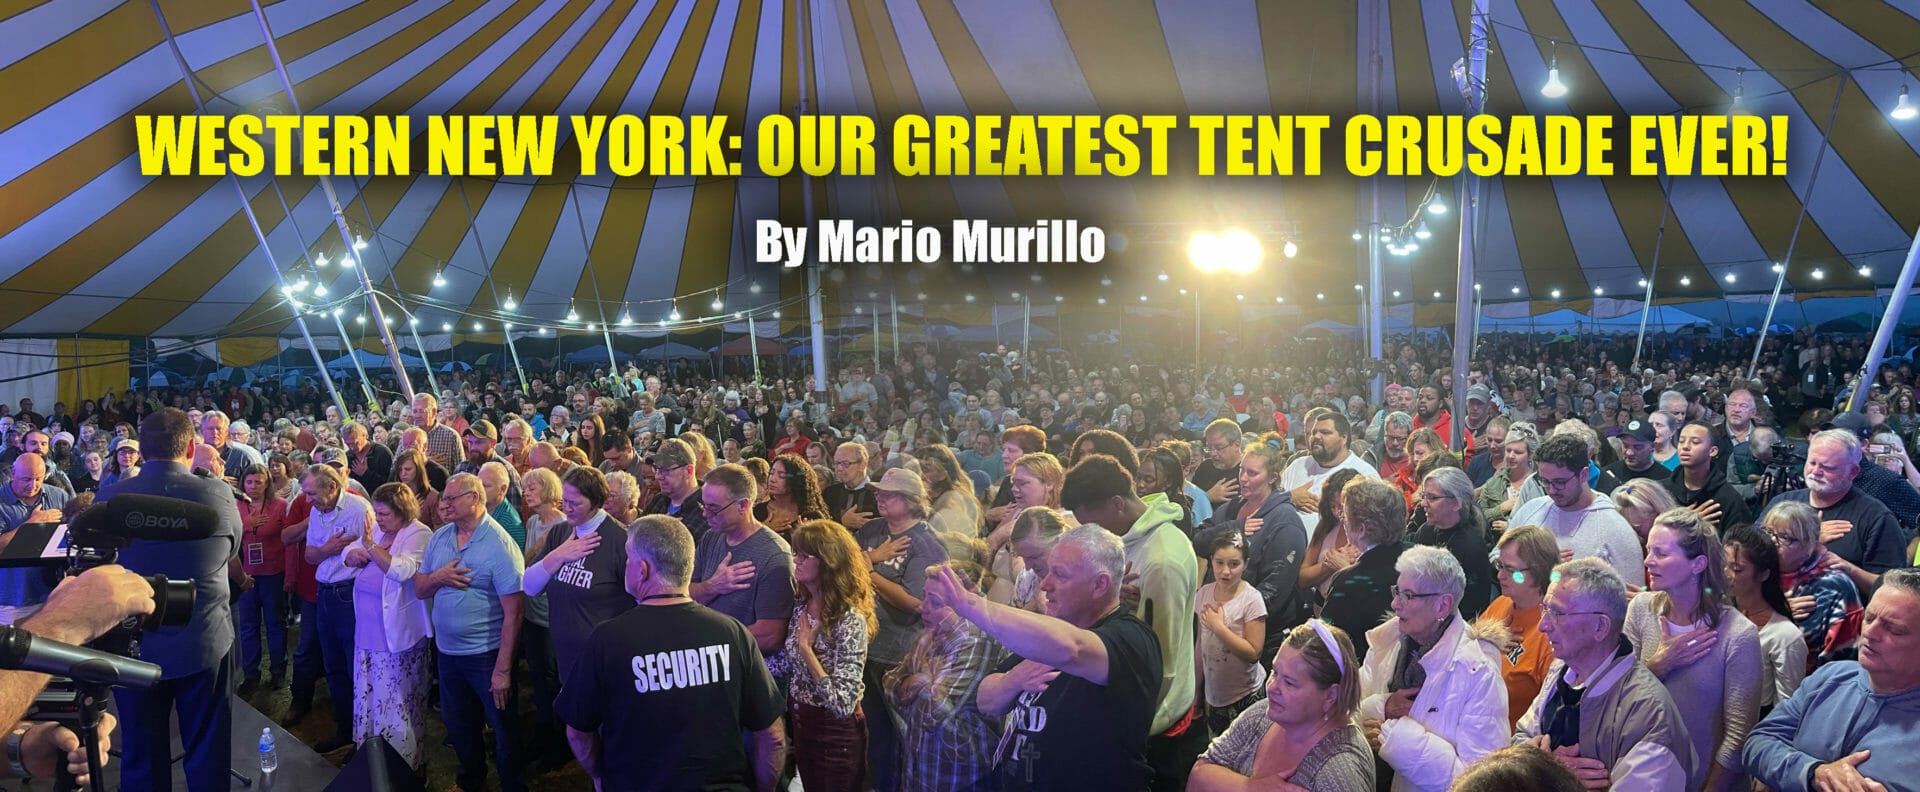 THE GREATEST TENT CRUSADE IN OUR HISTORY Mario Murillo Ministries